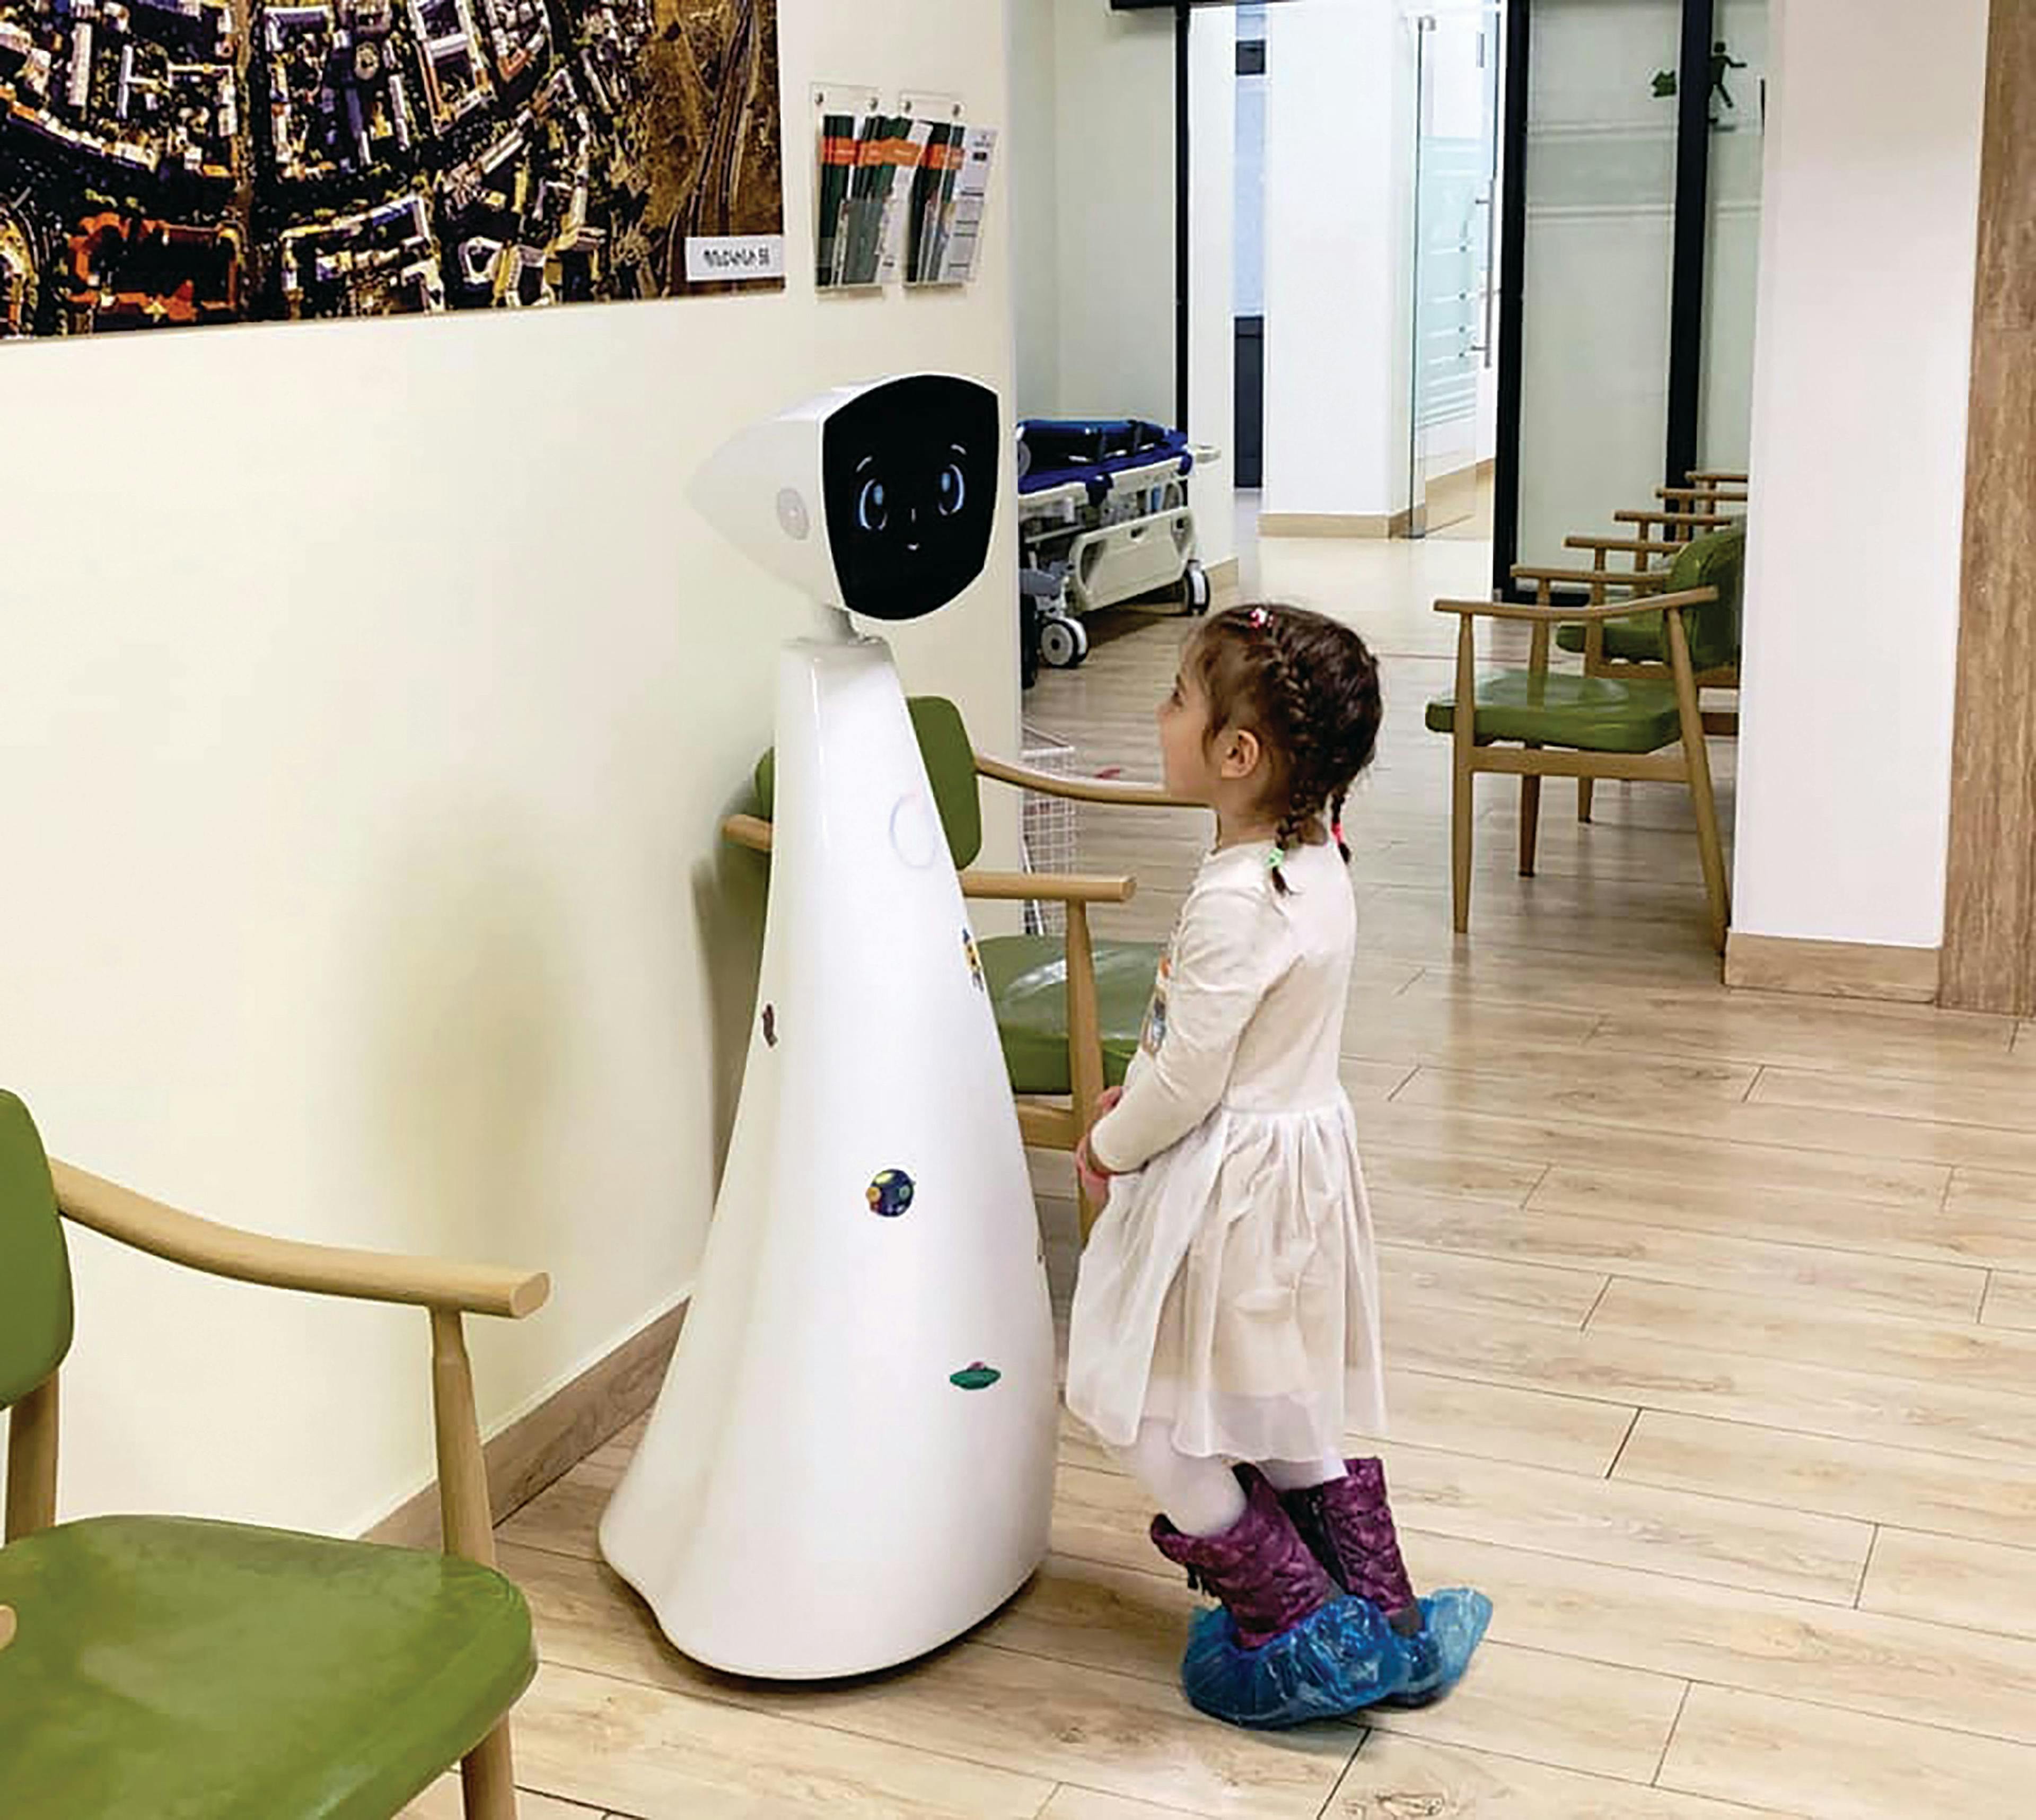 This Smart Robot Eases Dental Anxiety in Children